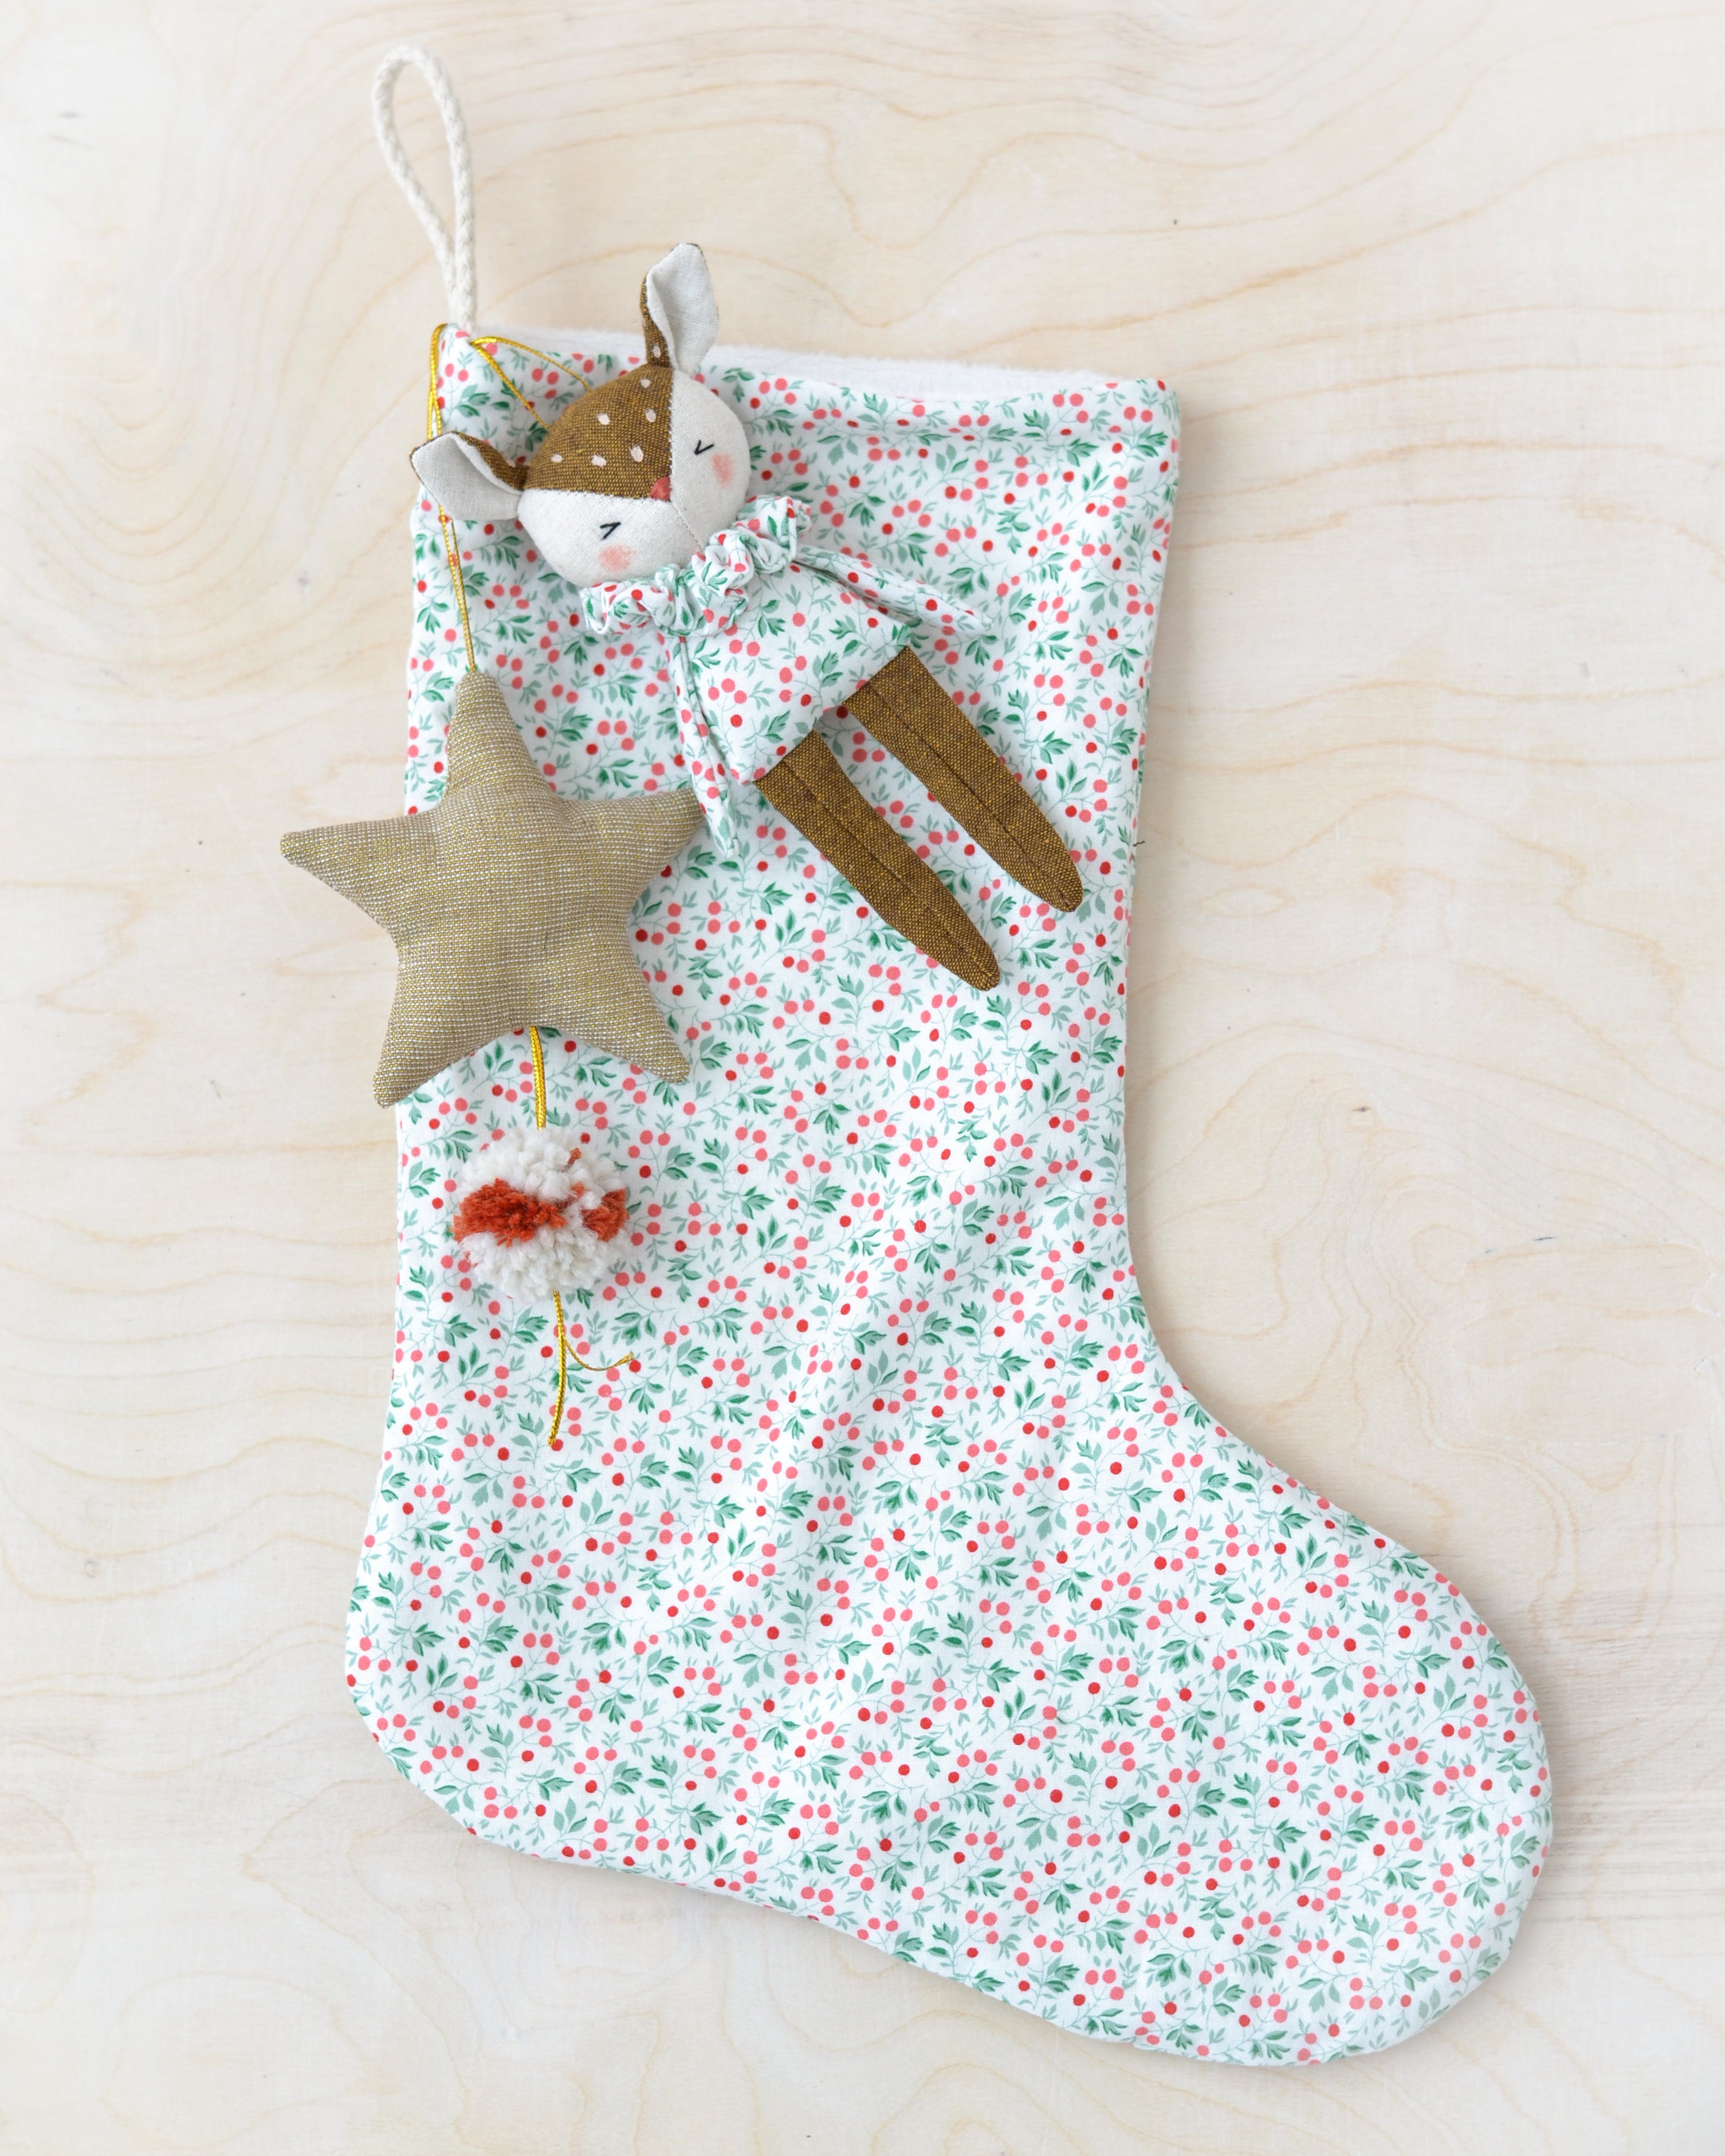 Sewing pattern - Christmas stocking with ornements